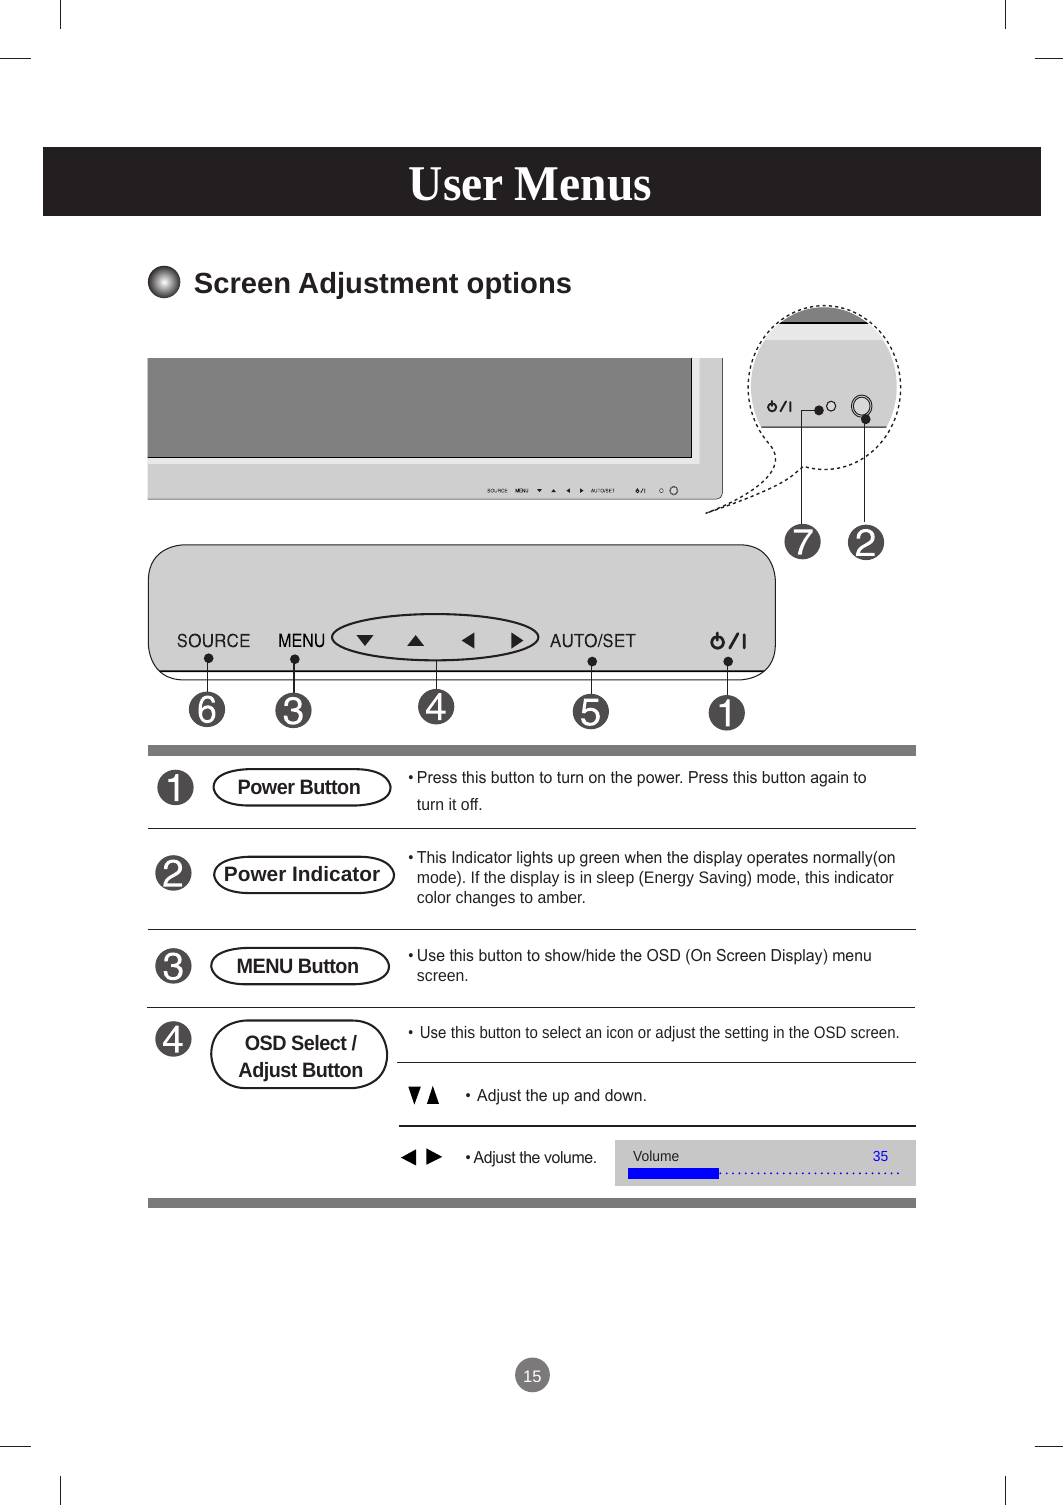 15User MenusScreen Adjustment options• Press this button to turn on the power. Press this button again to turn it off.• This Indicator lights up green when the display operates normally(on mode). If the display is in sleep (Energy Saving) mode, this indicator color changes to amber.Power Button• Adjust the volume.• Adjust the up and down.• Use this button to show/hide the OSD (On Screen Display) menu screen.MENU Button•  Use this button to select an icon or adjust the setting in the OSD screen.OSD Select /Adjust ButtonPower IndicatorVolume 35